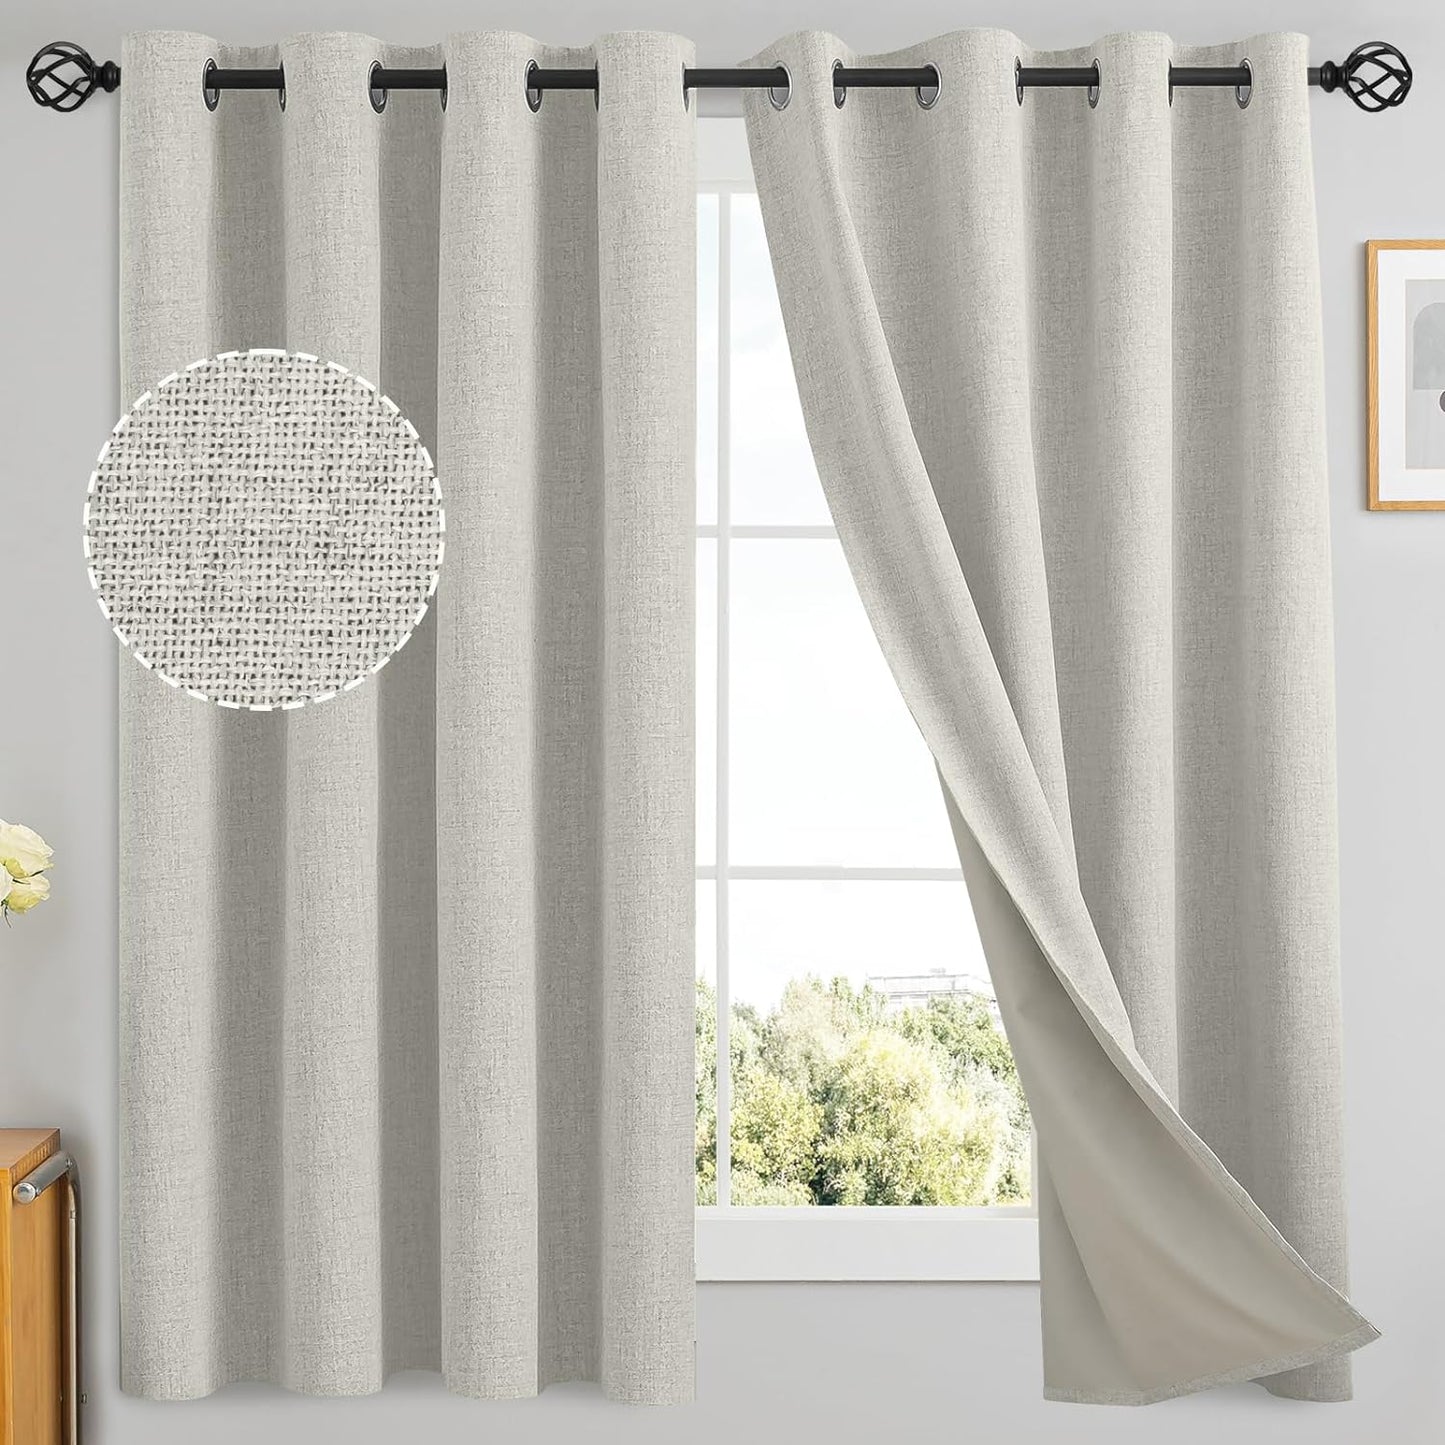 Yakamok Natural Linen Curtains 100% Blackout 84 Inches Long,Room Darkening Textured Curtains for Living Room Thermal Grommet Bedroom Curtains 2 Panels with Greyish White Liner  Yakamok Cream 52W X 63L / 2 Panels 